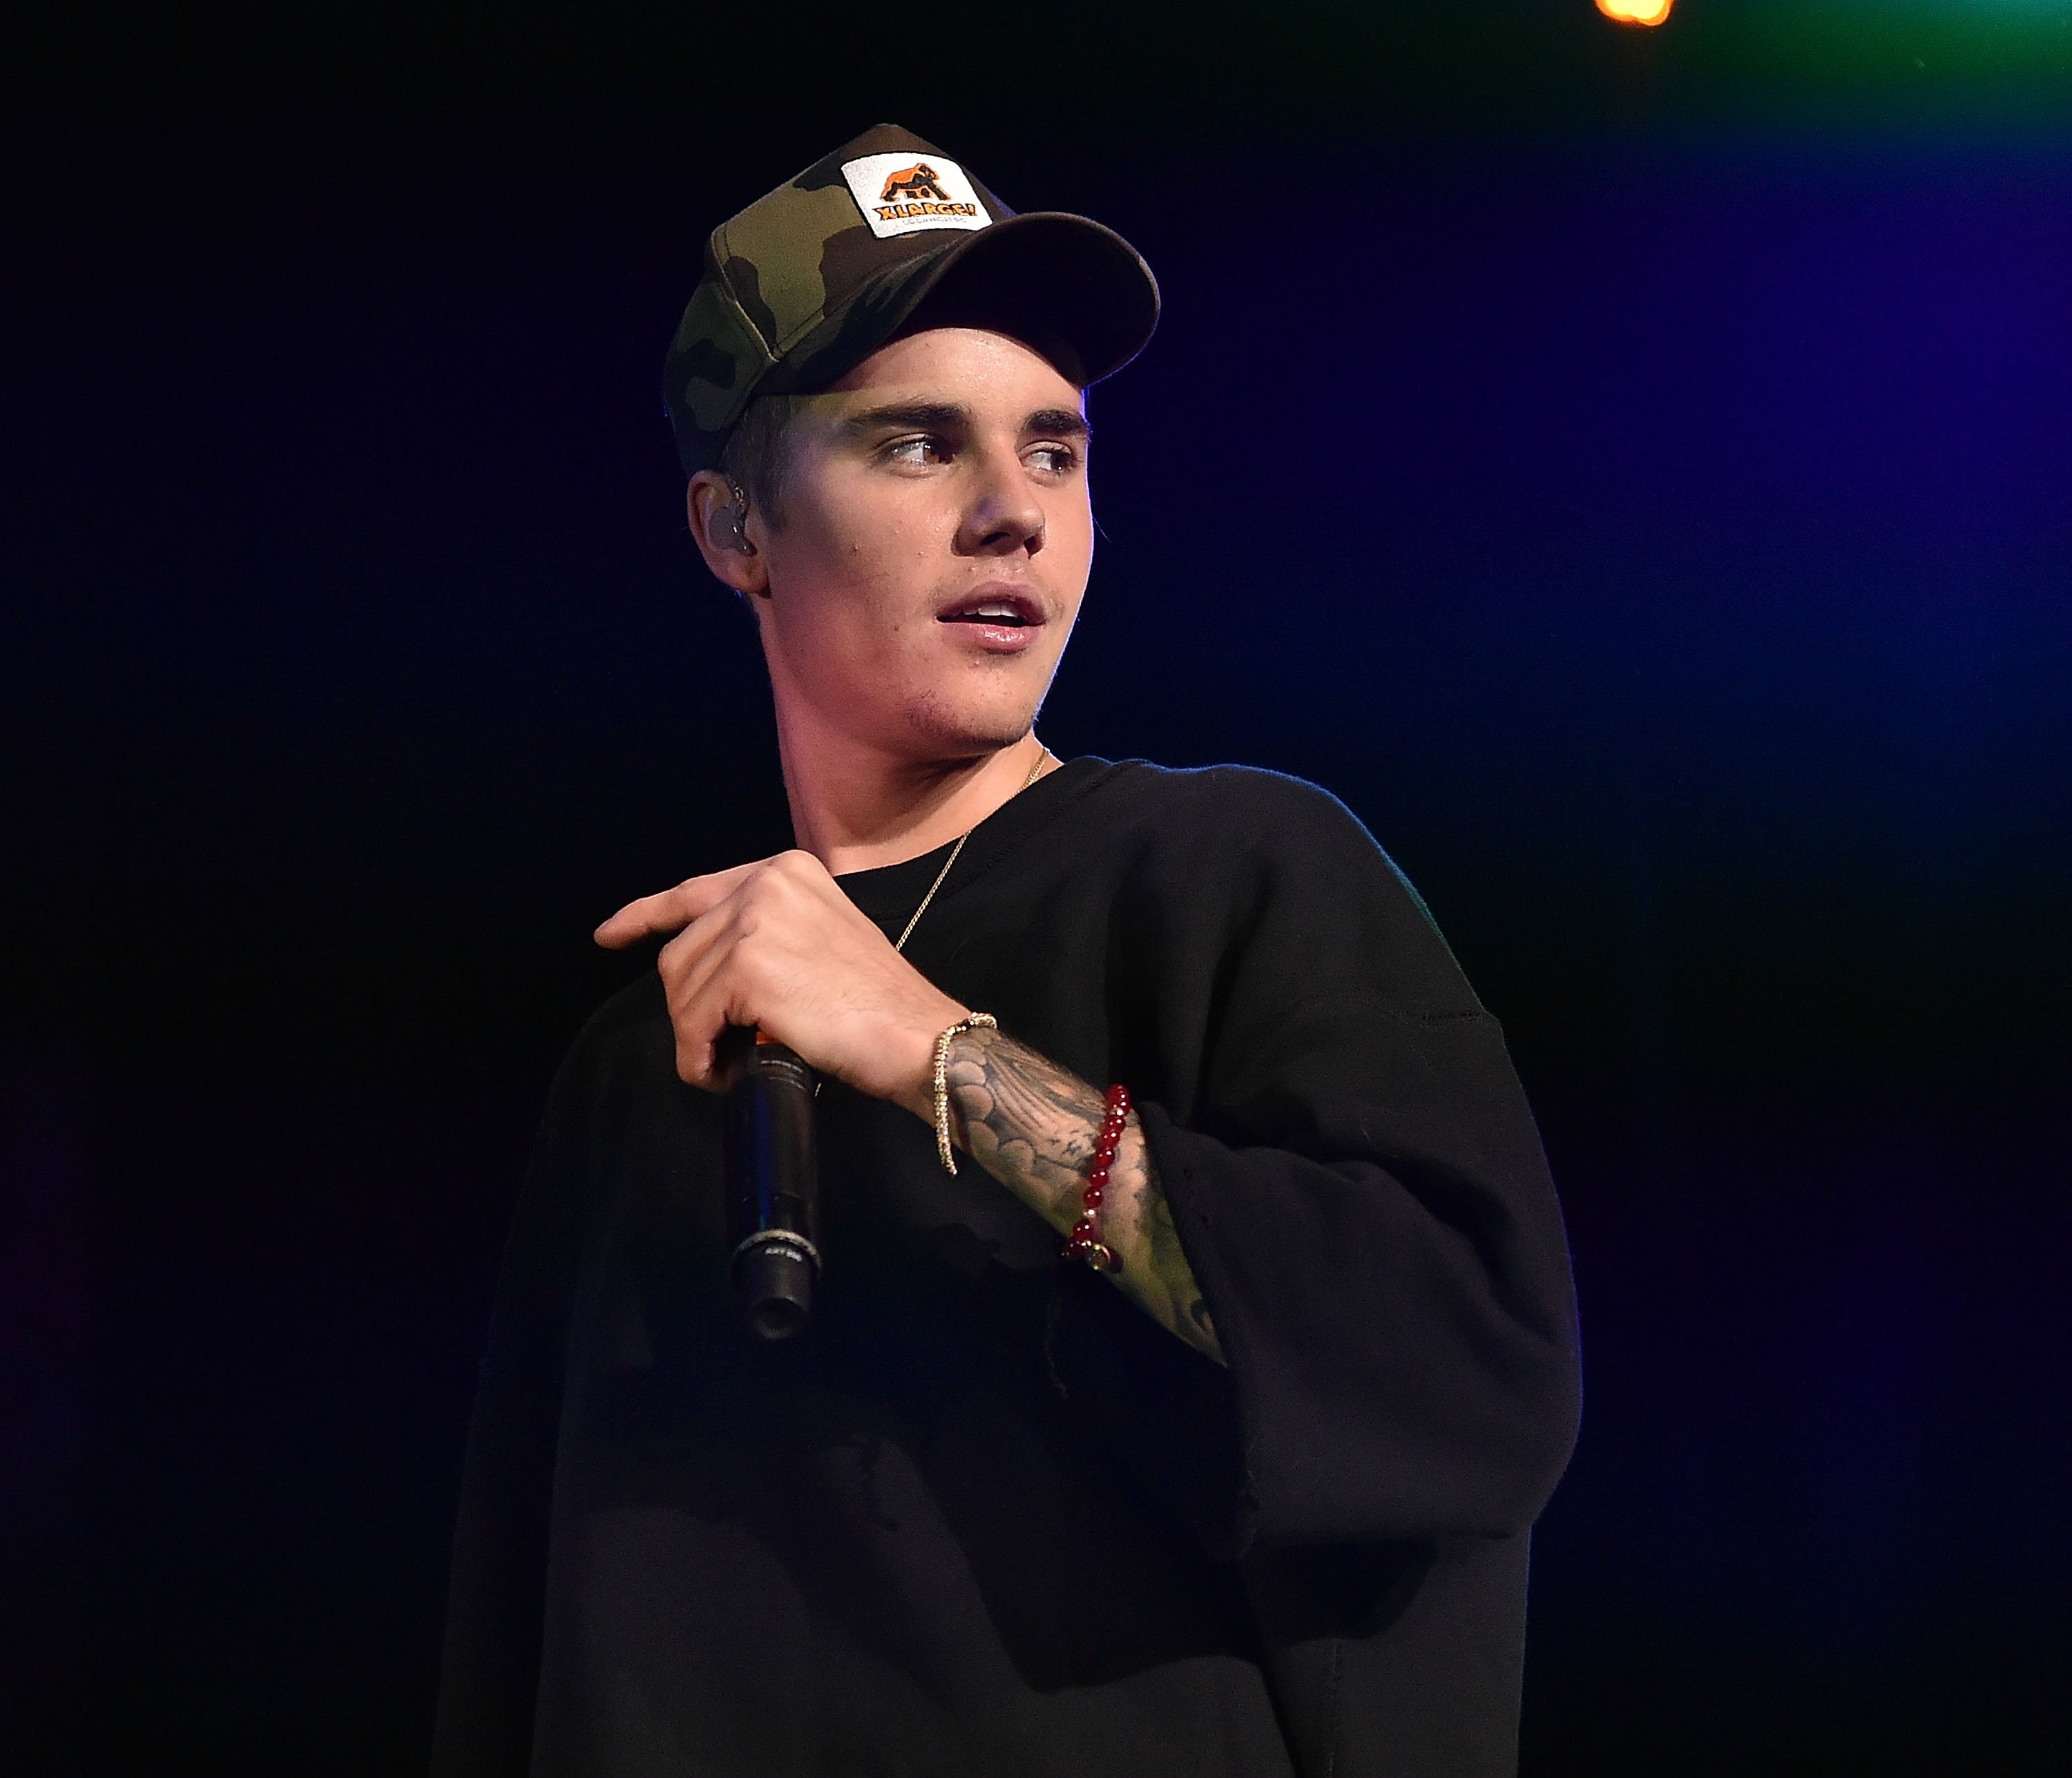 Justin Bieber during his onstage performance for Jingle Ball 2015 at the Phillips Area in Atlanta. | Photo: Getty Images